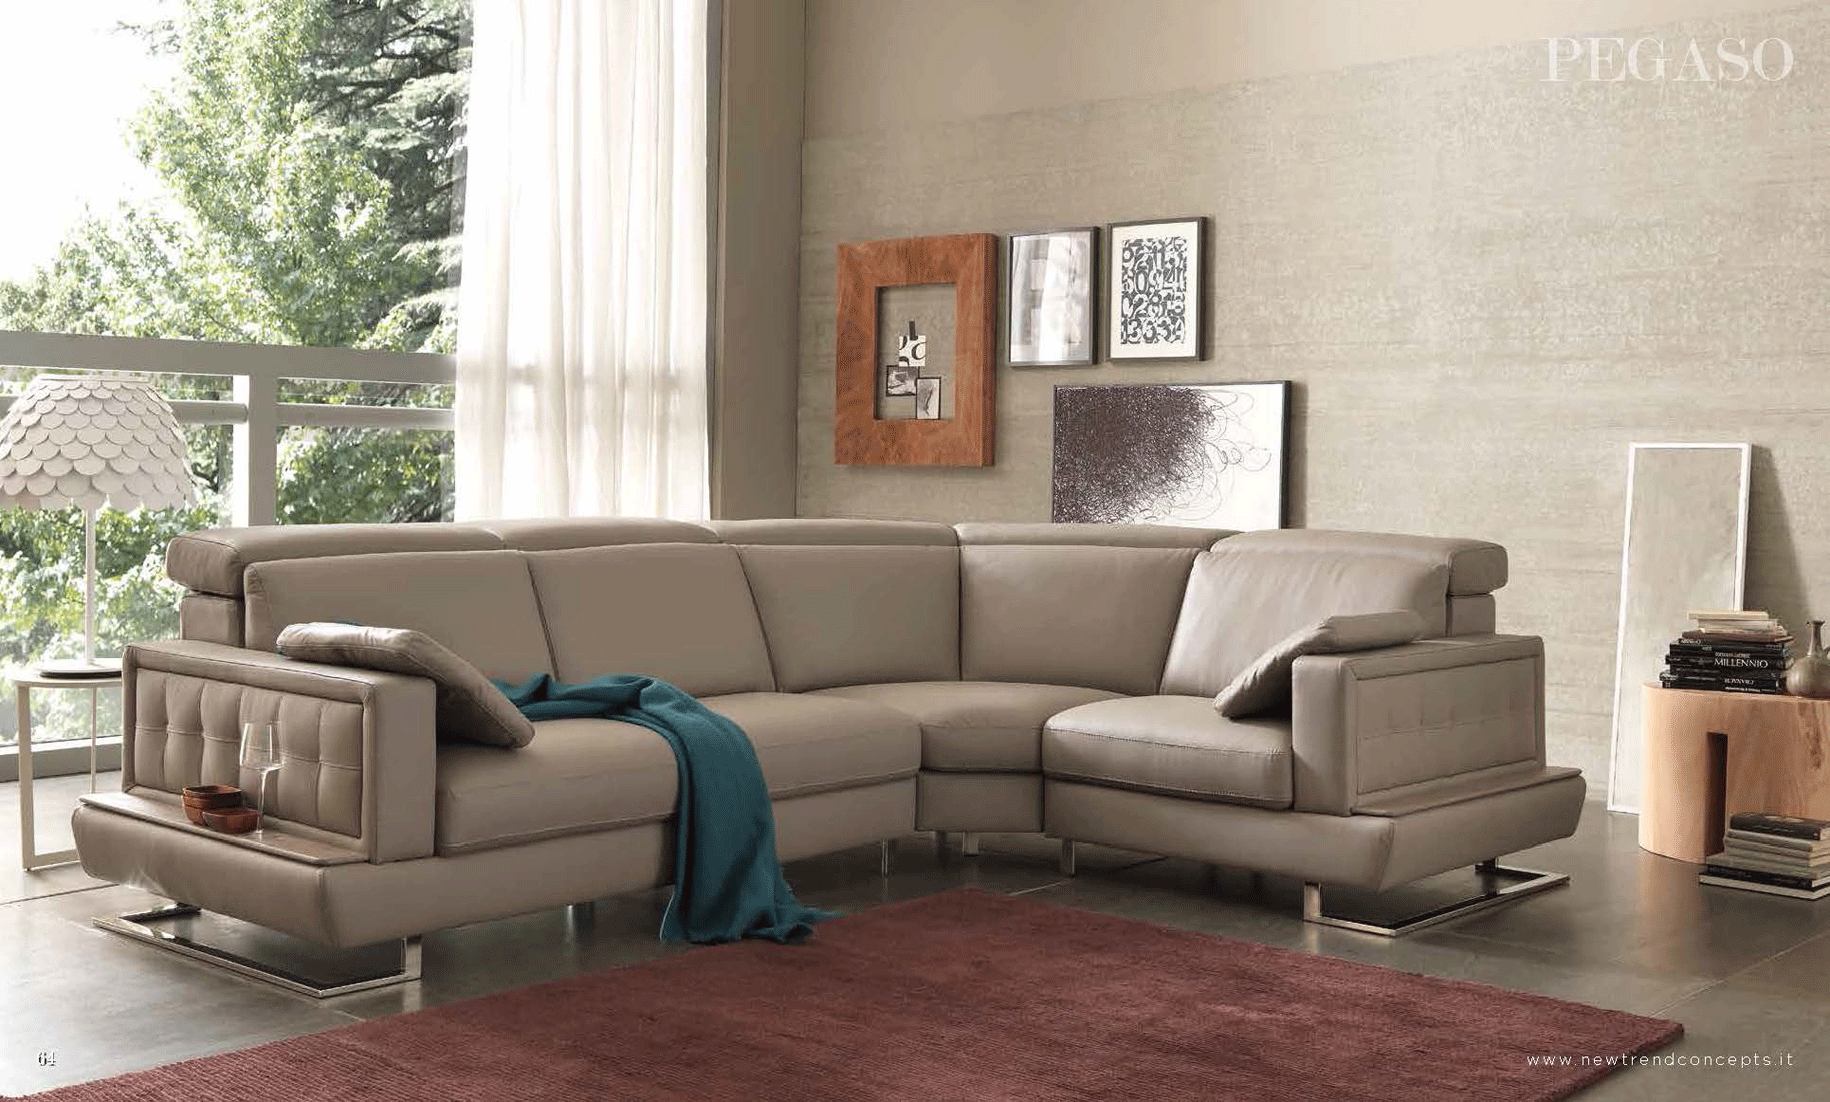 Living Room Furniture Sectionals with Sleepers Pegaso